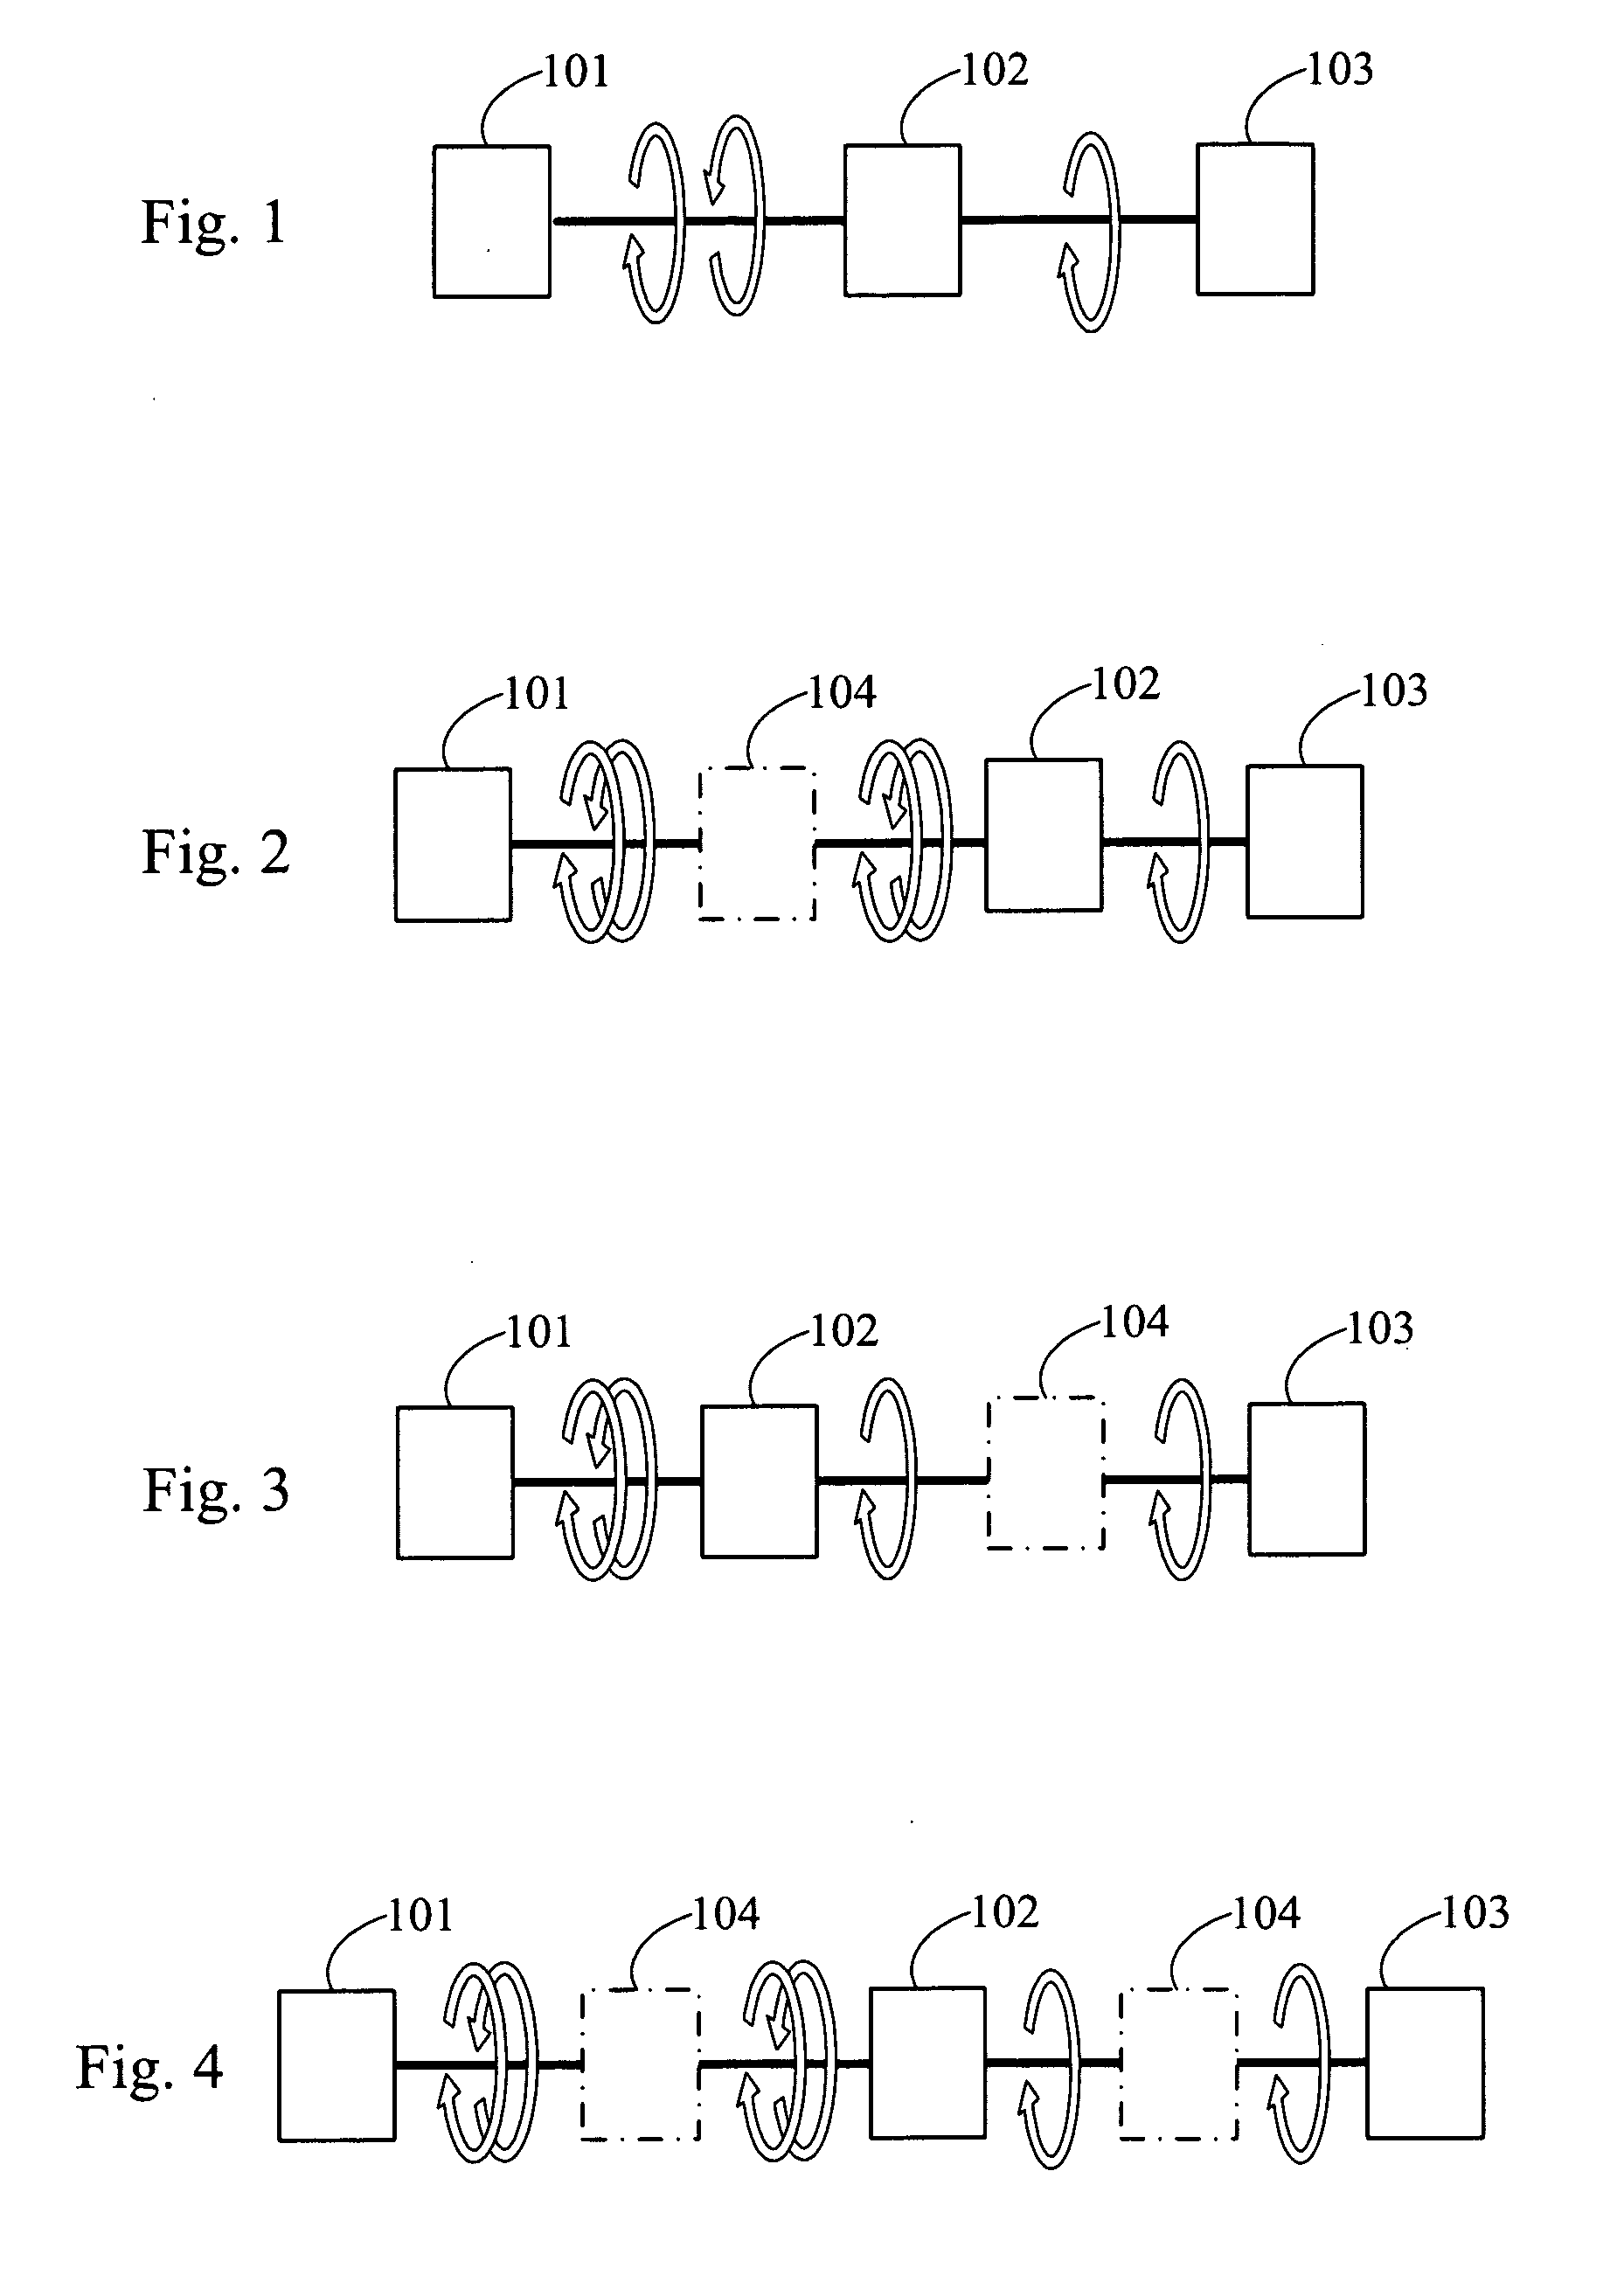 Manpower-driven device with bi-directional input and constant directional